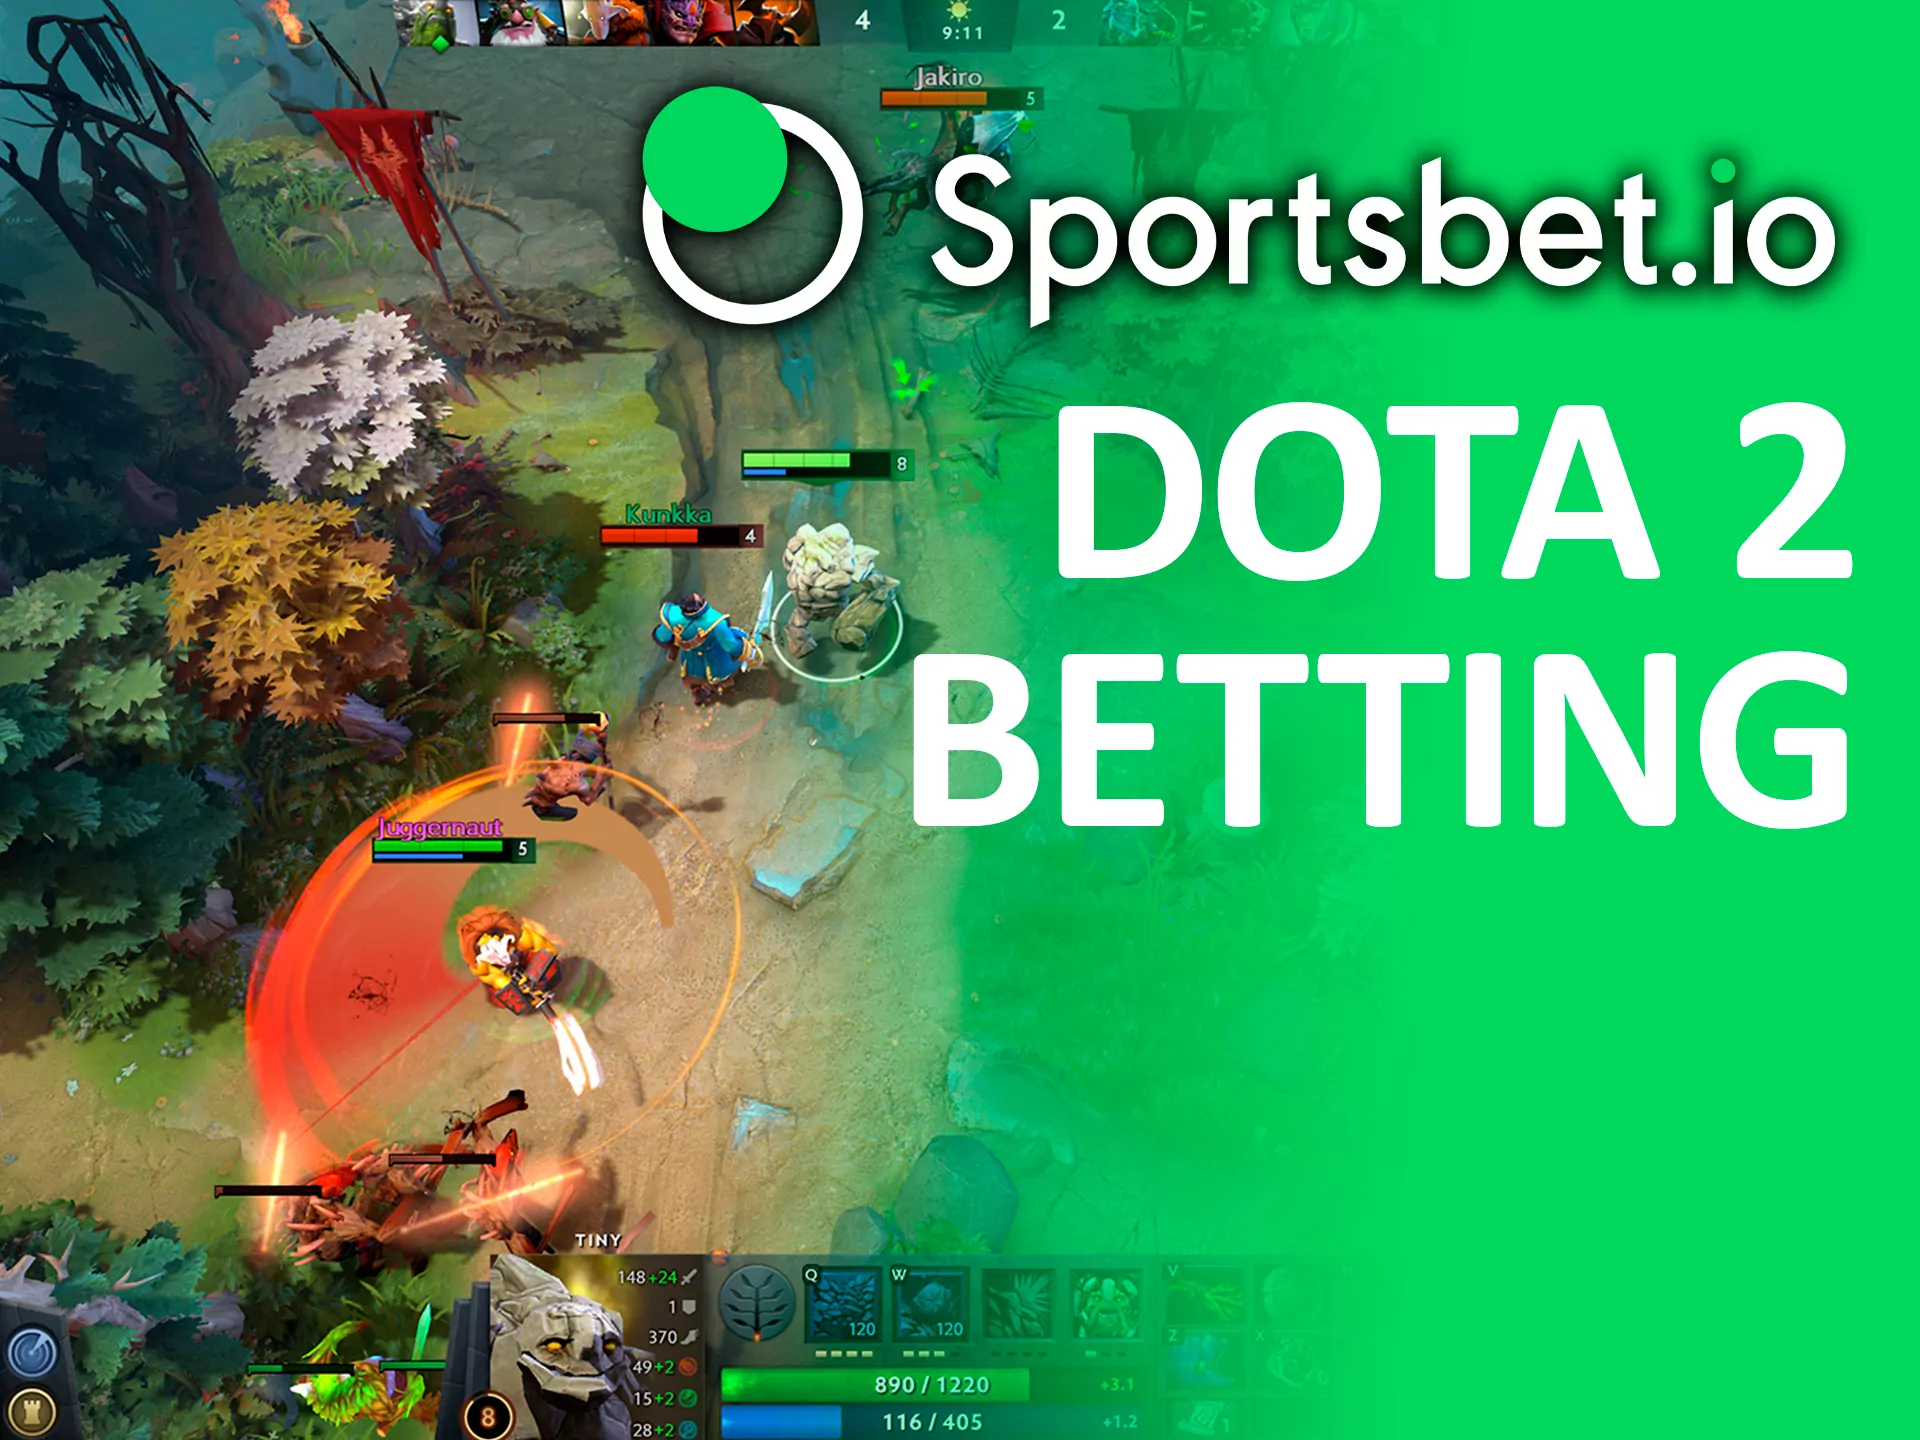 Place bets on Dota 2, LOL and Starcraft in the Sportsbet app.